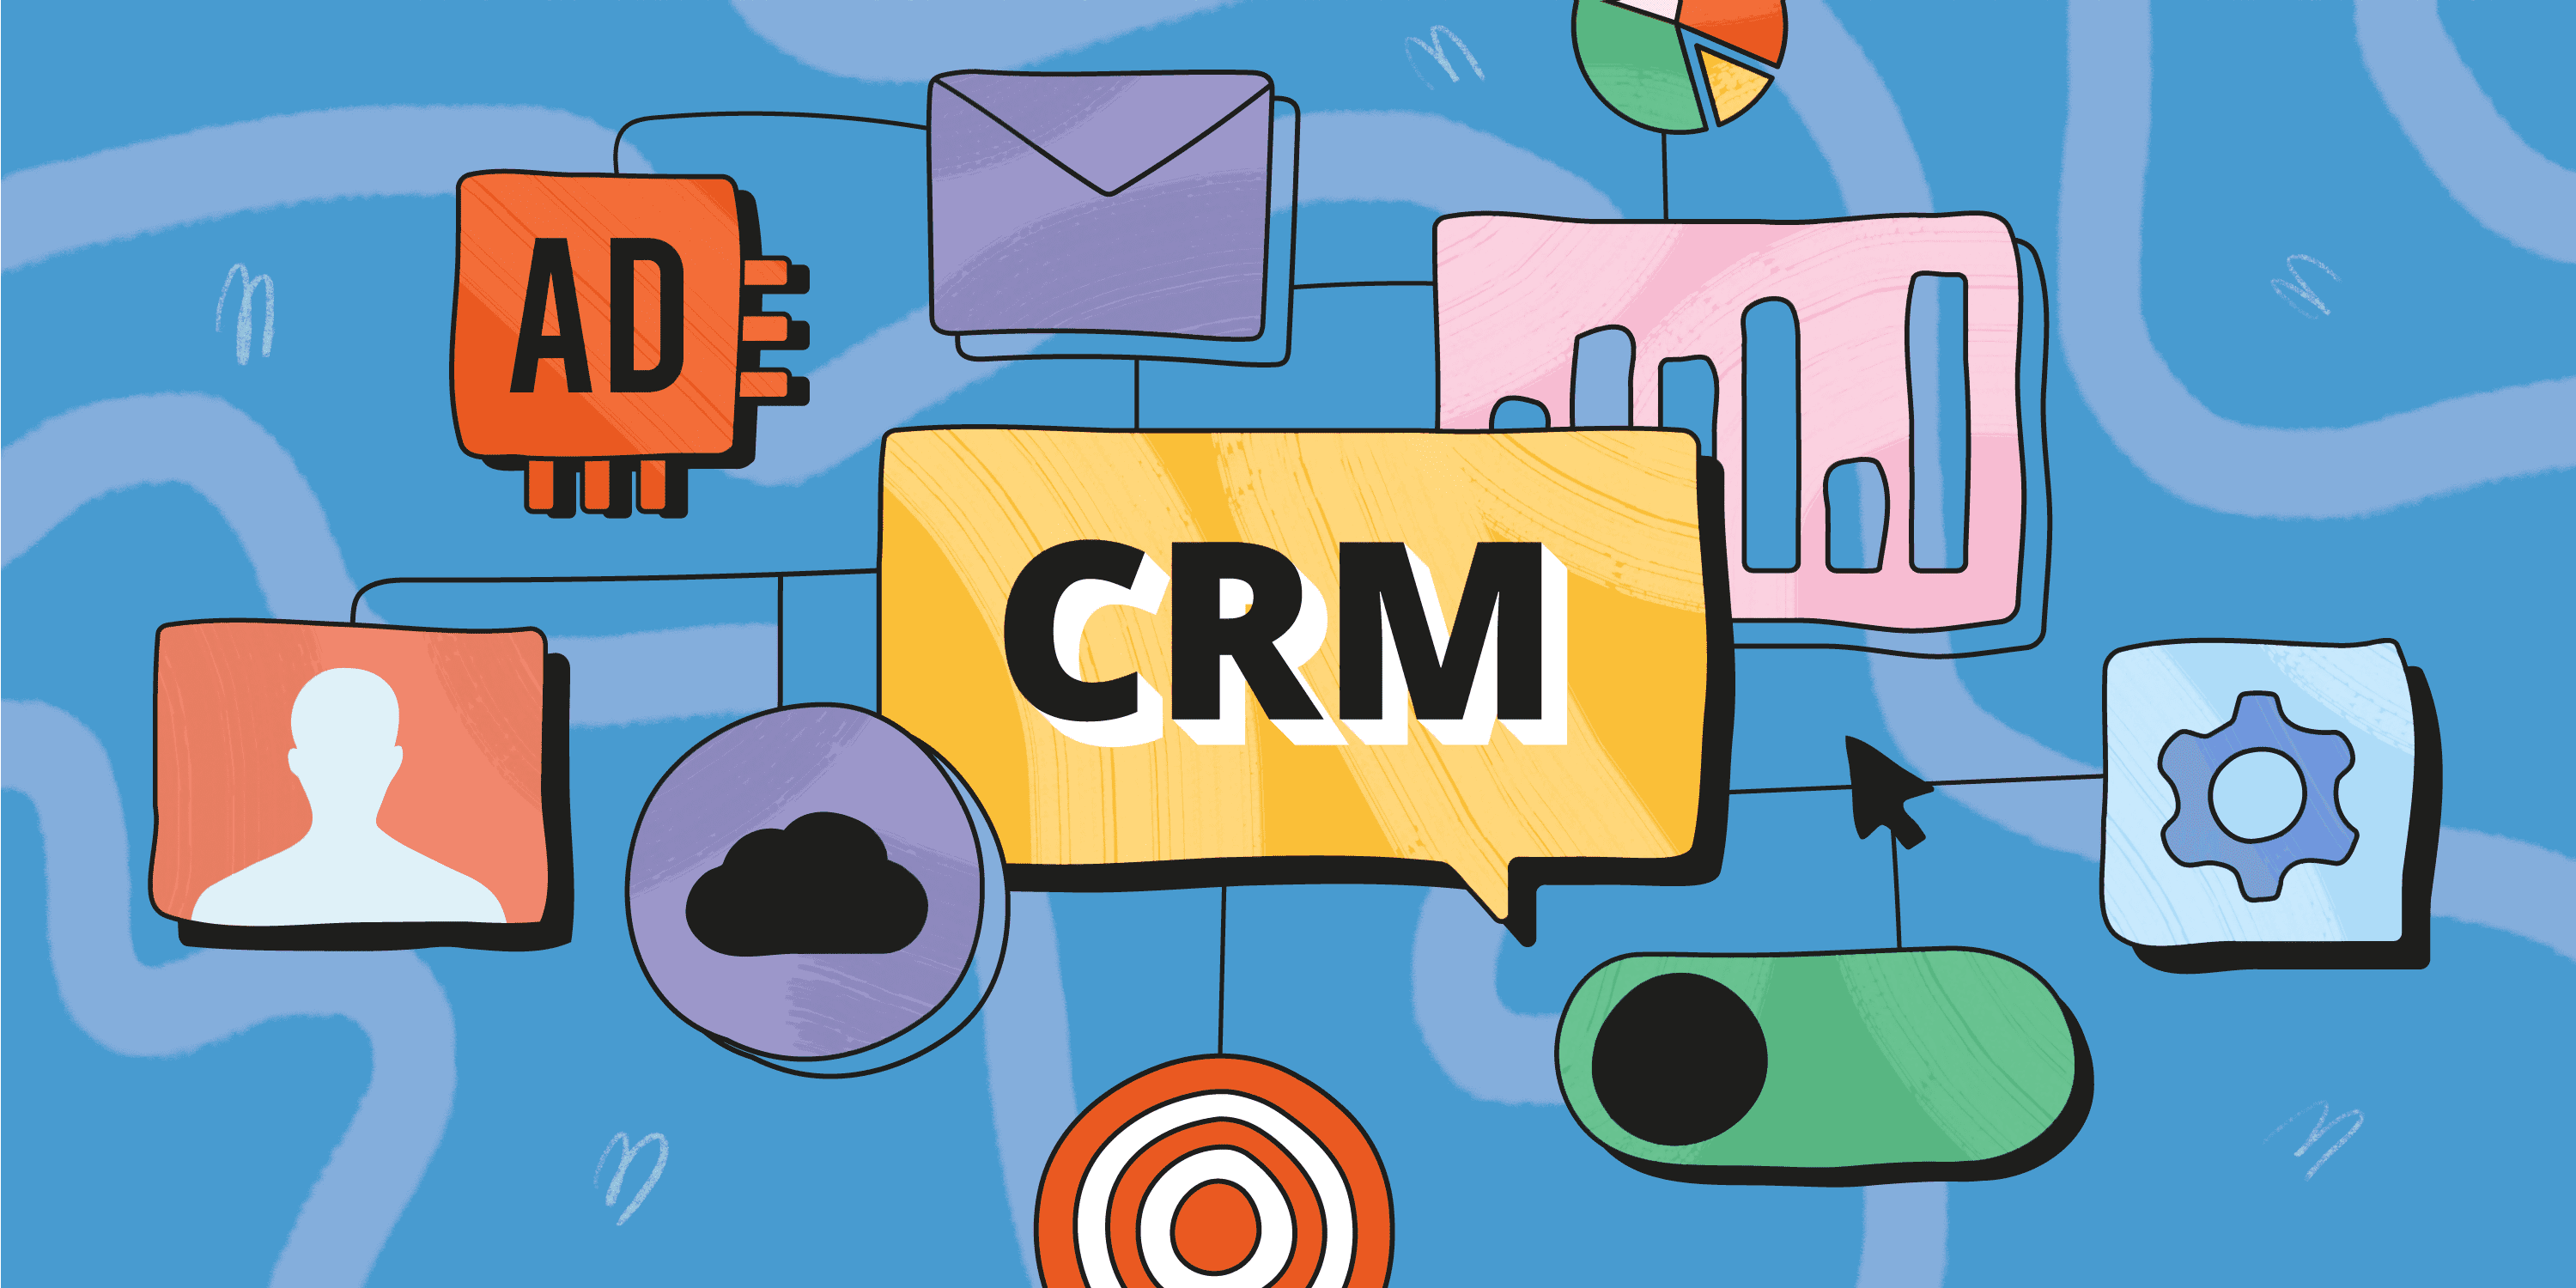 What Role Does a CRM System Play in Sales and Marketing Processes?